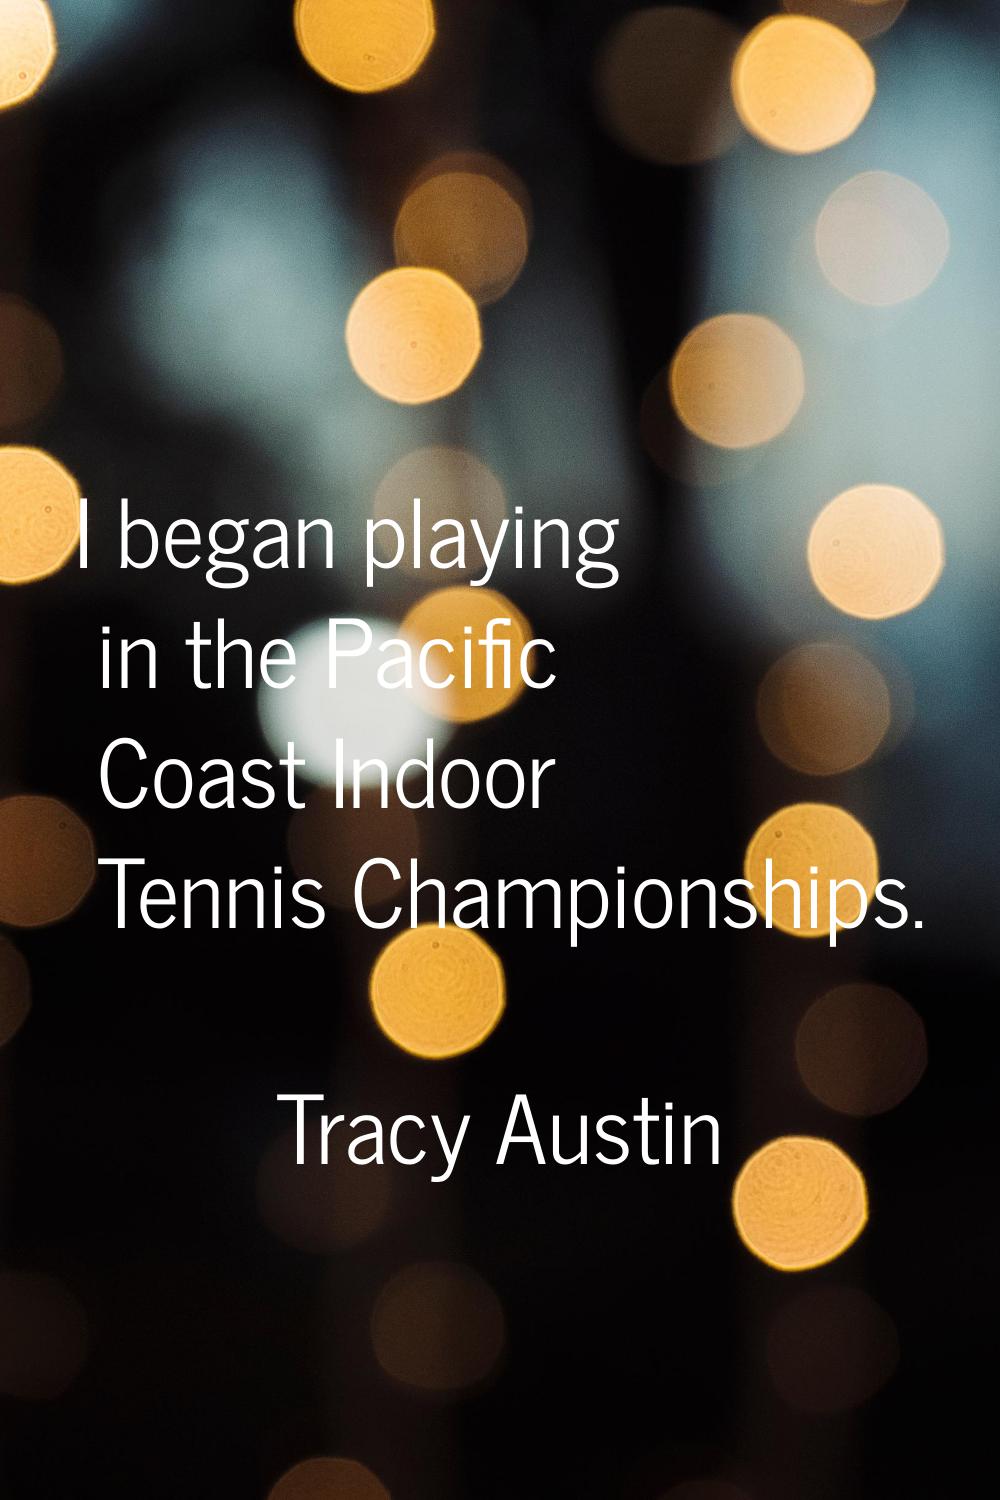 I began playing in the Pacific Coast Indoor Tennis Championships.